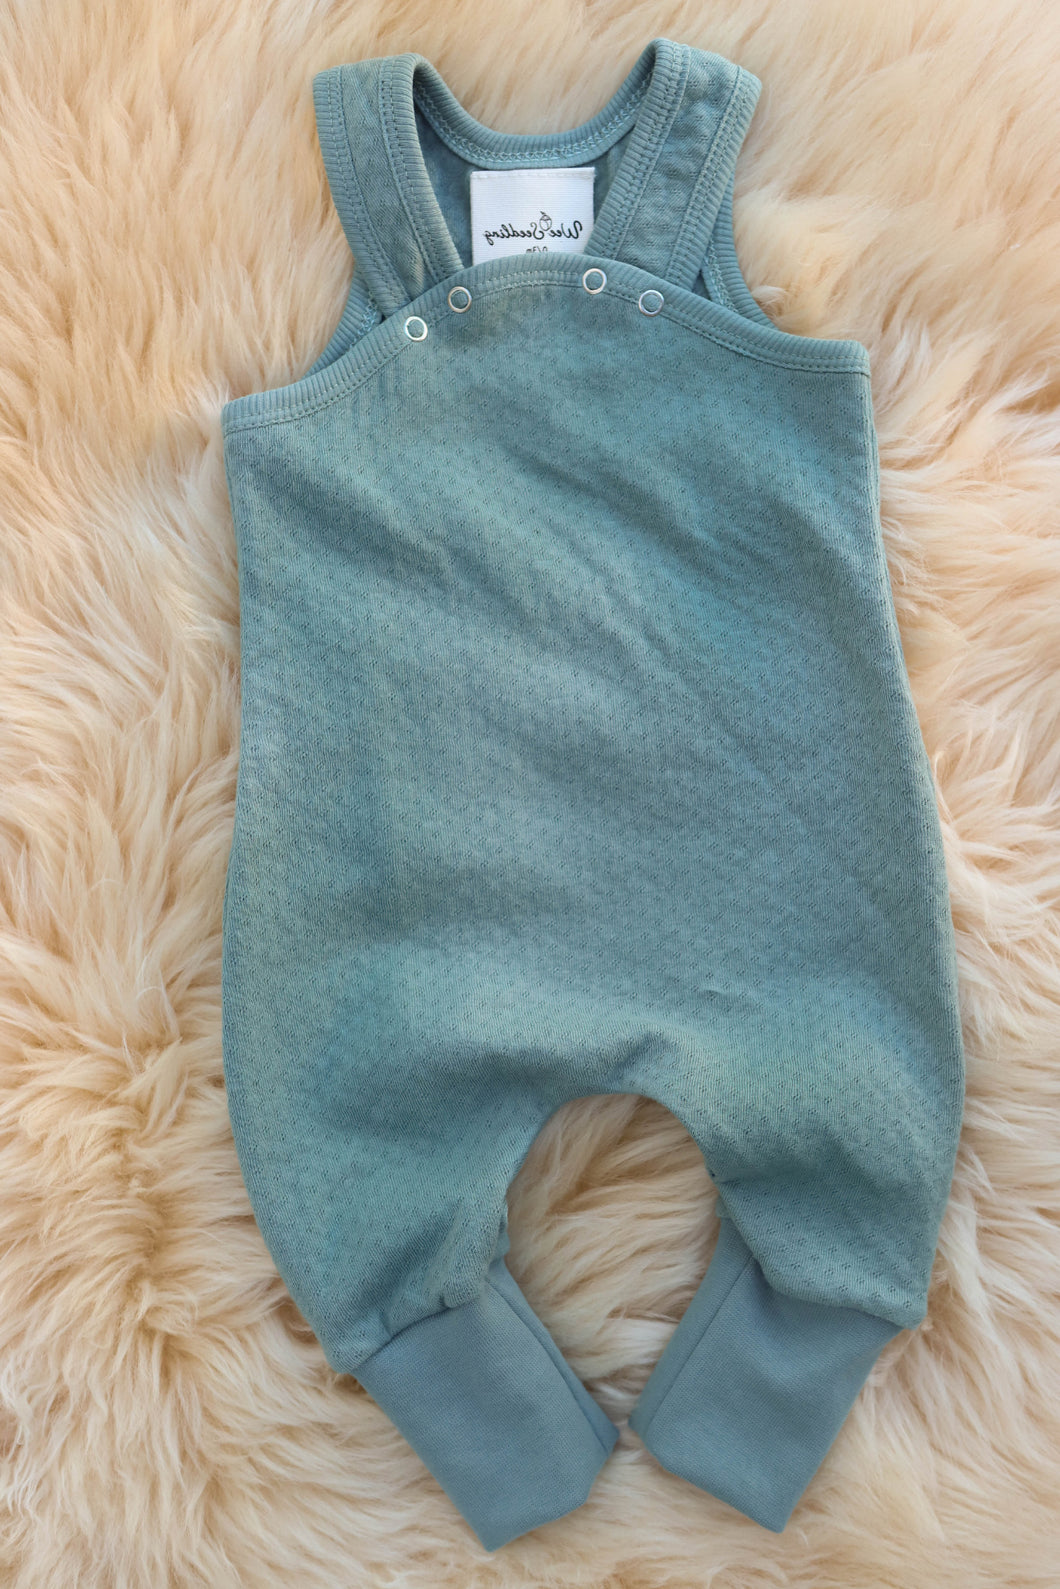 Organic Pima Cotton Cloth Diaper Overall Dungarees Romper on Sheep skin rug Wee Seedling